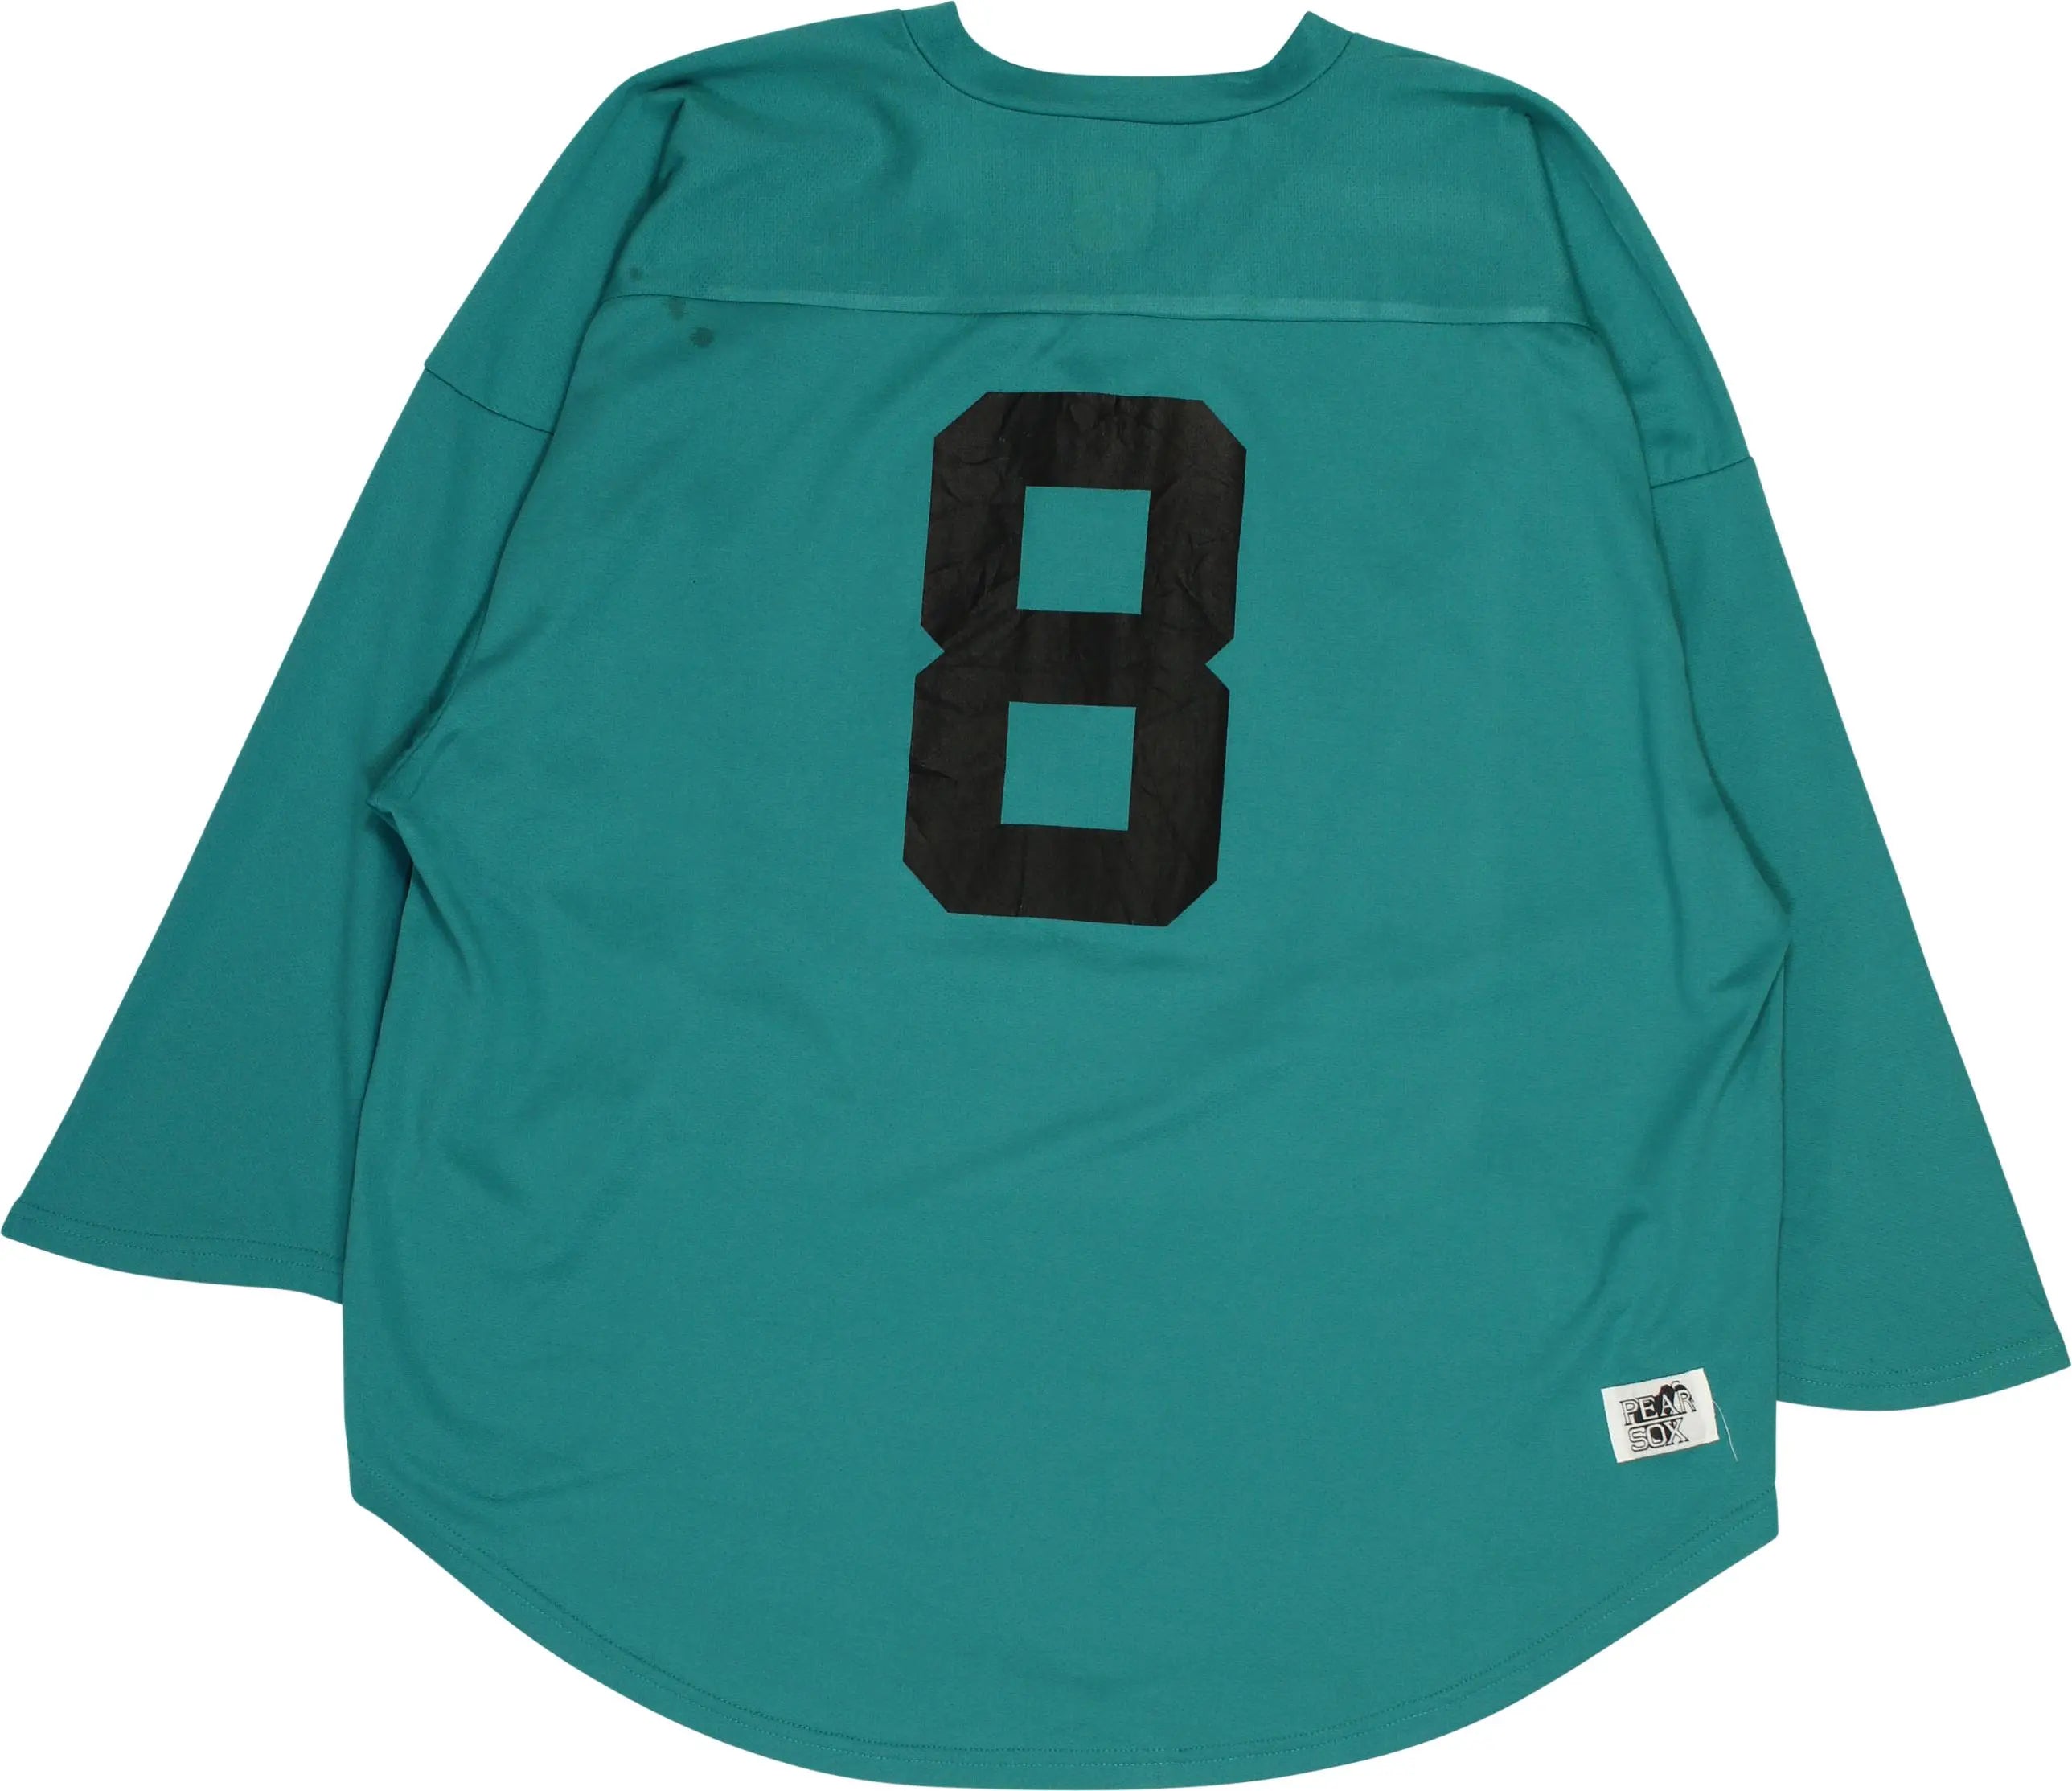 Wear the Pear - Green sport jersey- ThriftTale.com - Vintage and second handclothing